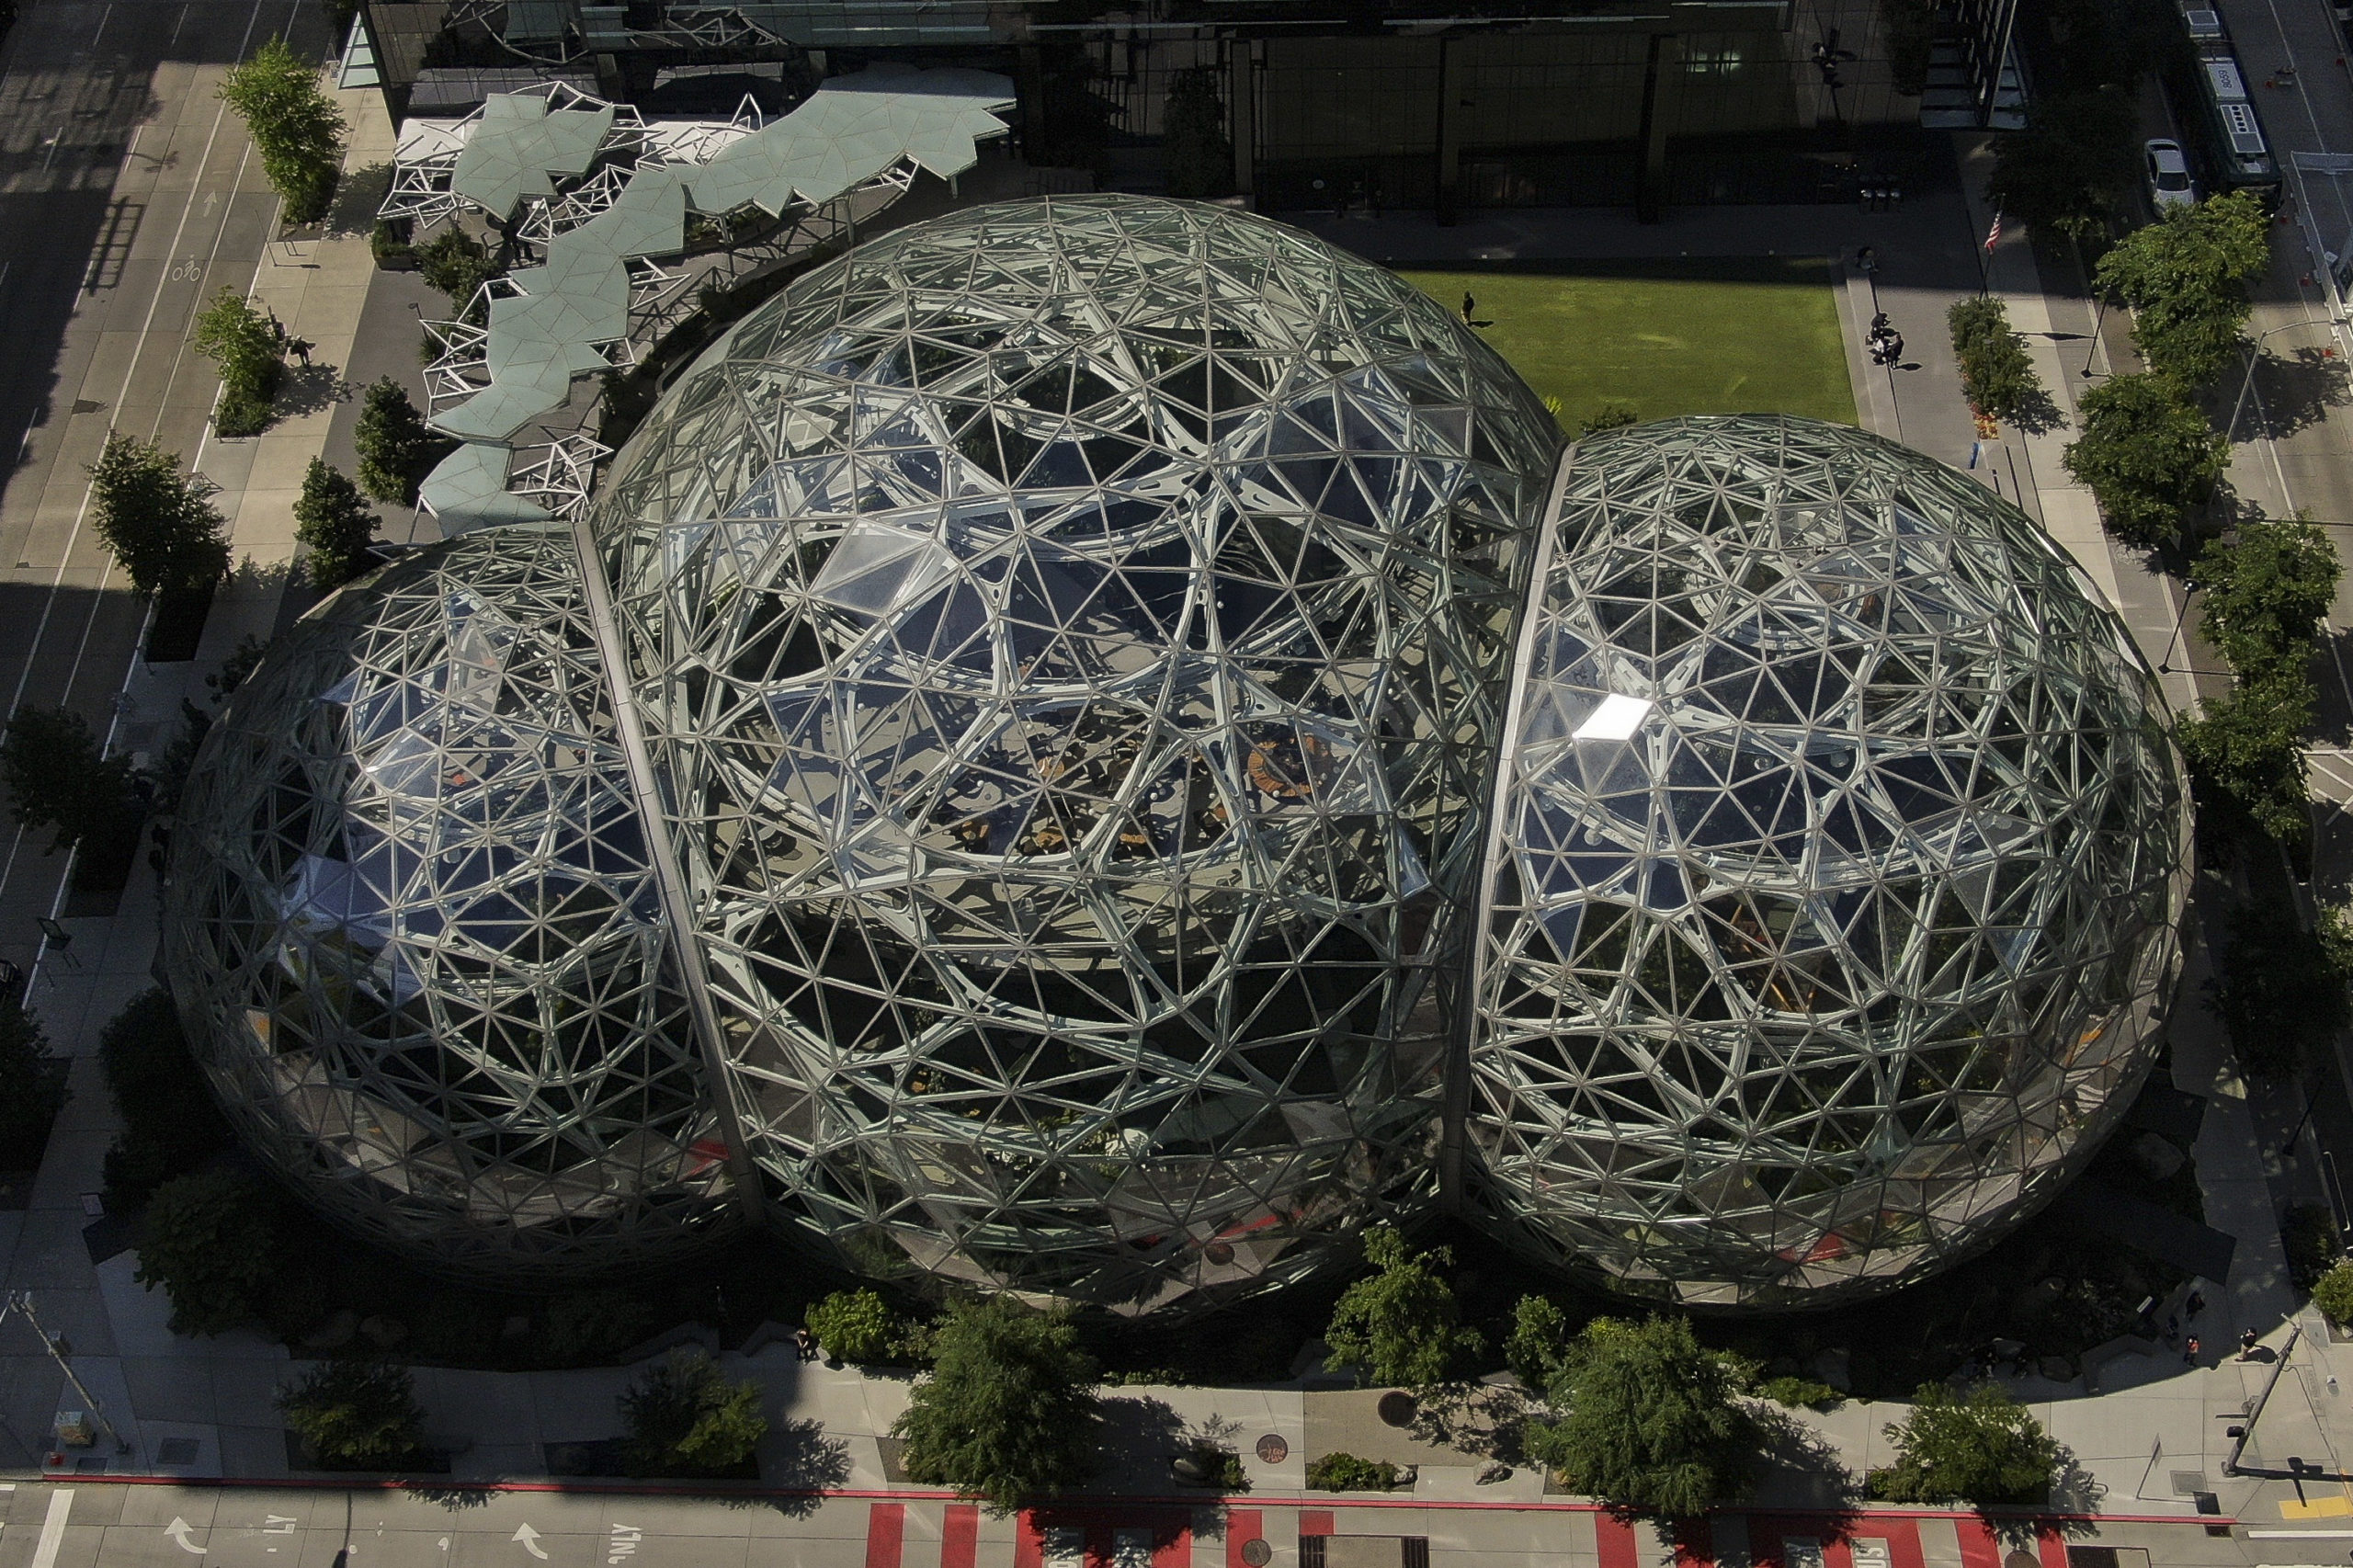 An aerial view of the Spheres at the Amazon.com Inc. headquarters on May 20, 2021 in Seattle, Washington. (Photo by David Ryder/Getty Images)